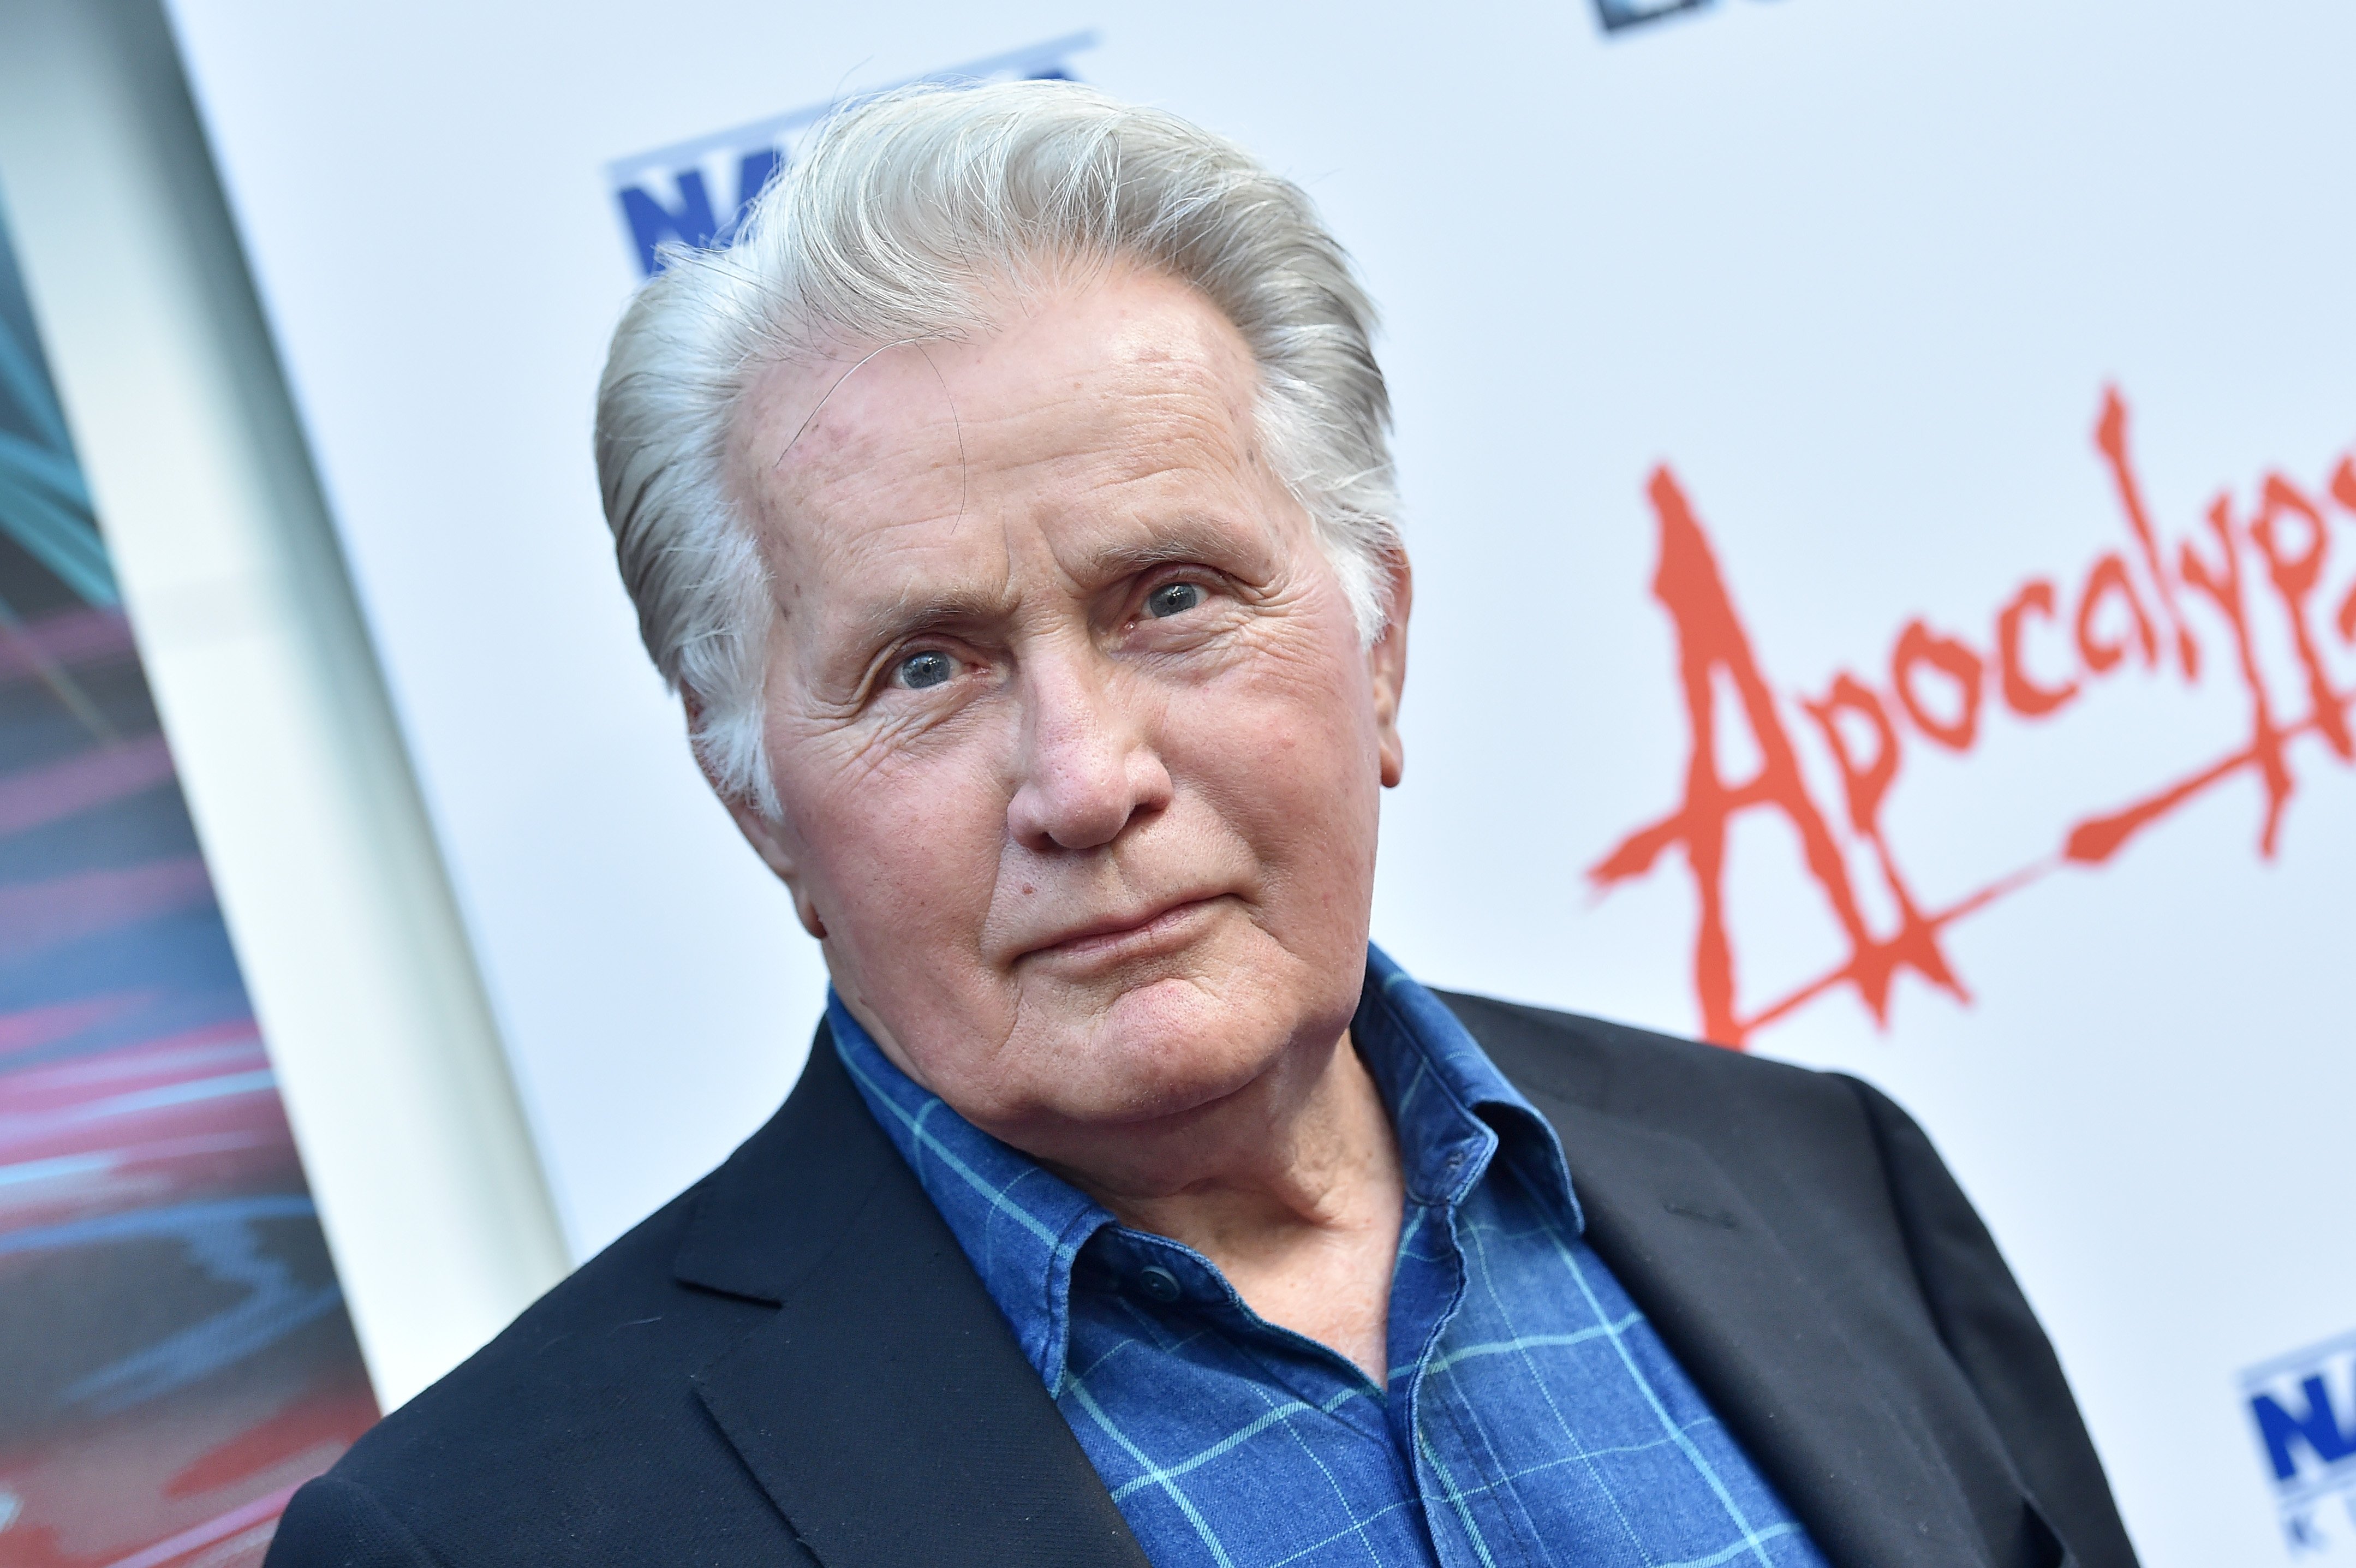 Martin Sheen attends the L.A. premiere of Lionsgate's "Apocalypse Now Final Cut" at ArcLight Cinerama Dome on August 12, 2019, in Hollywood, California. | Source: Getty Images